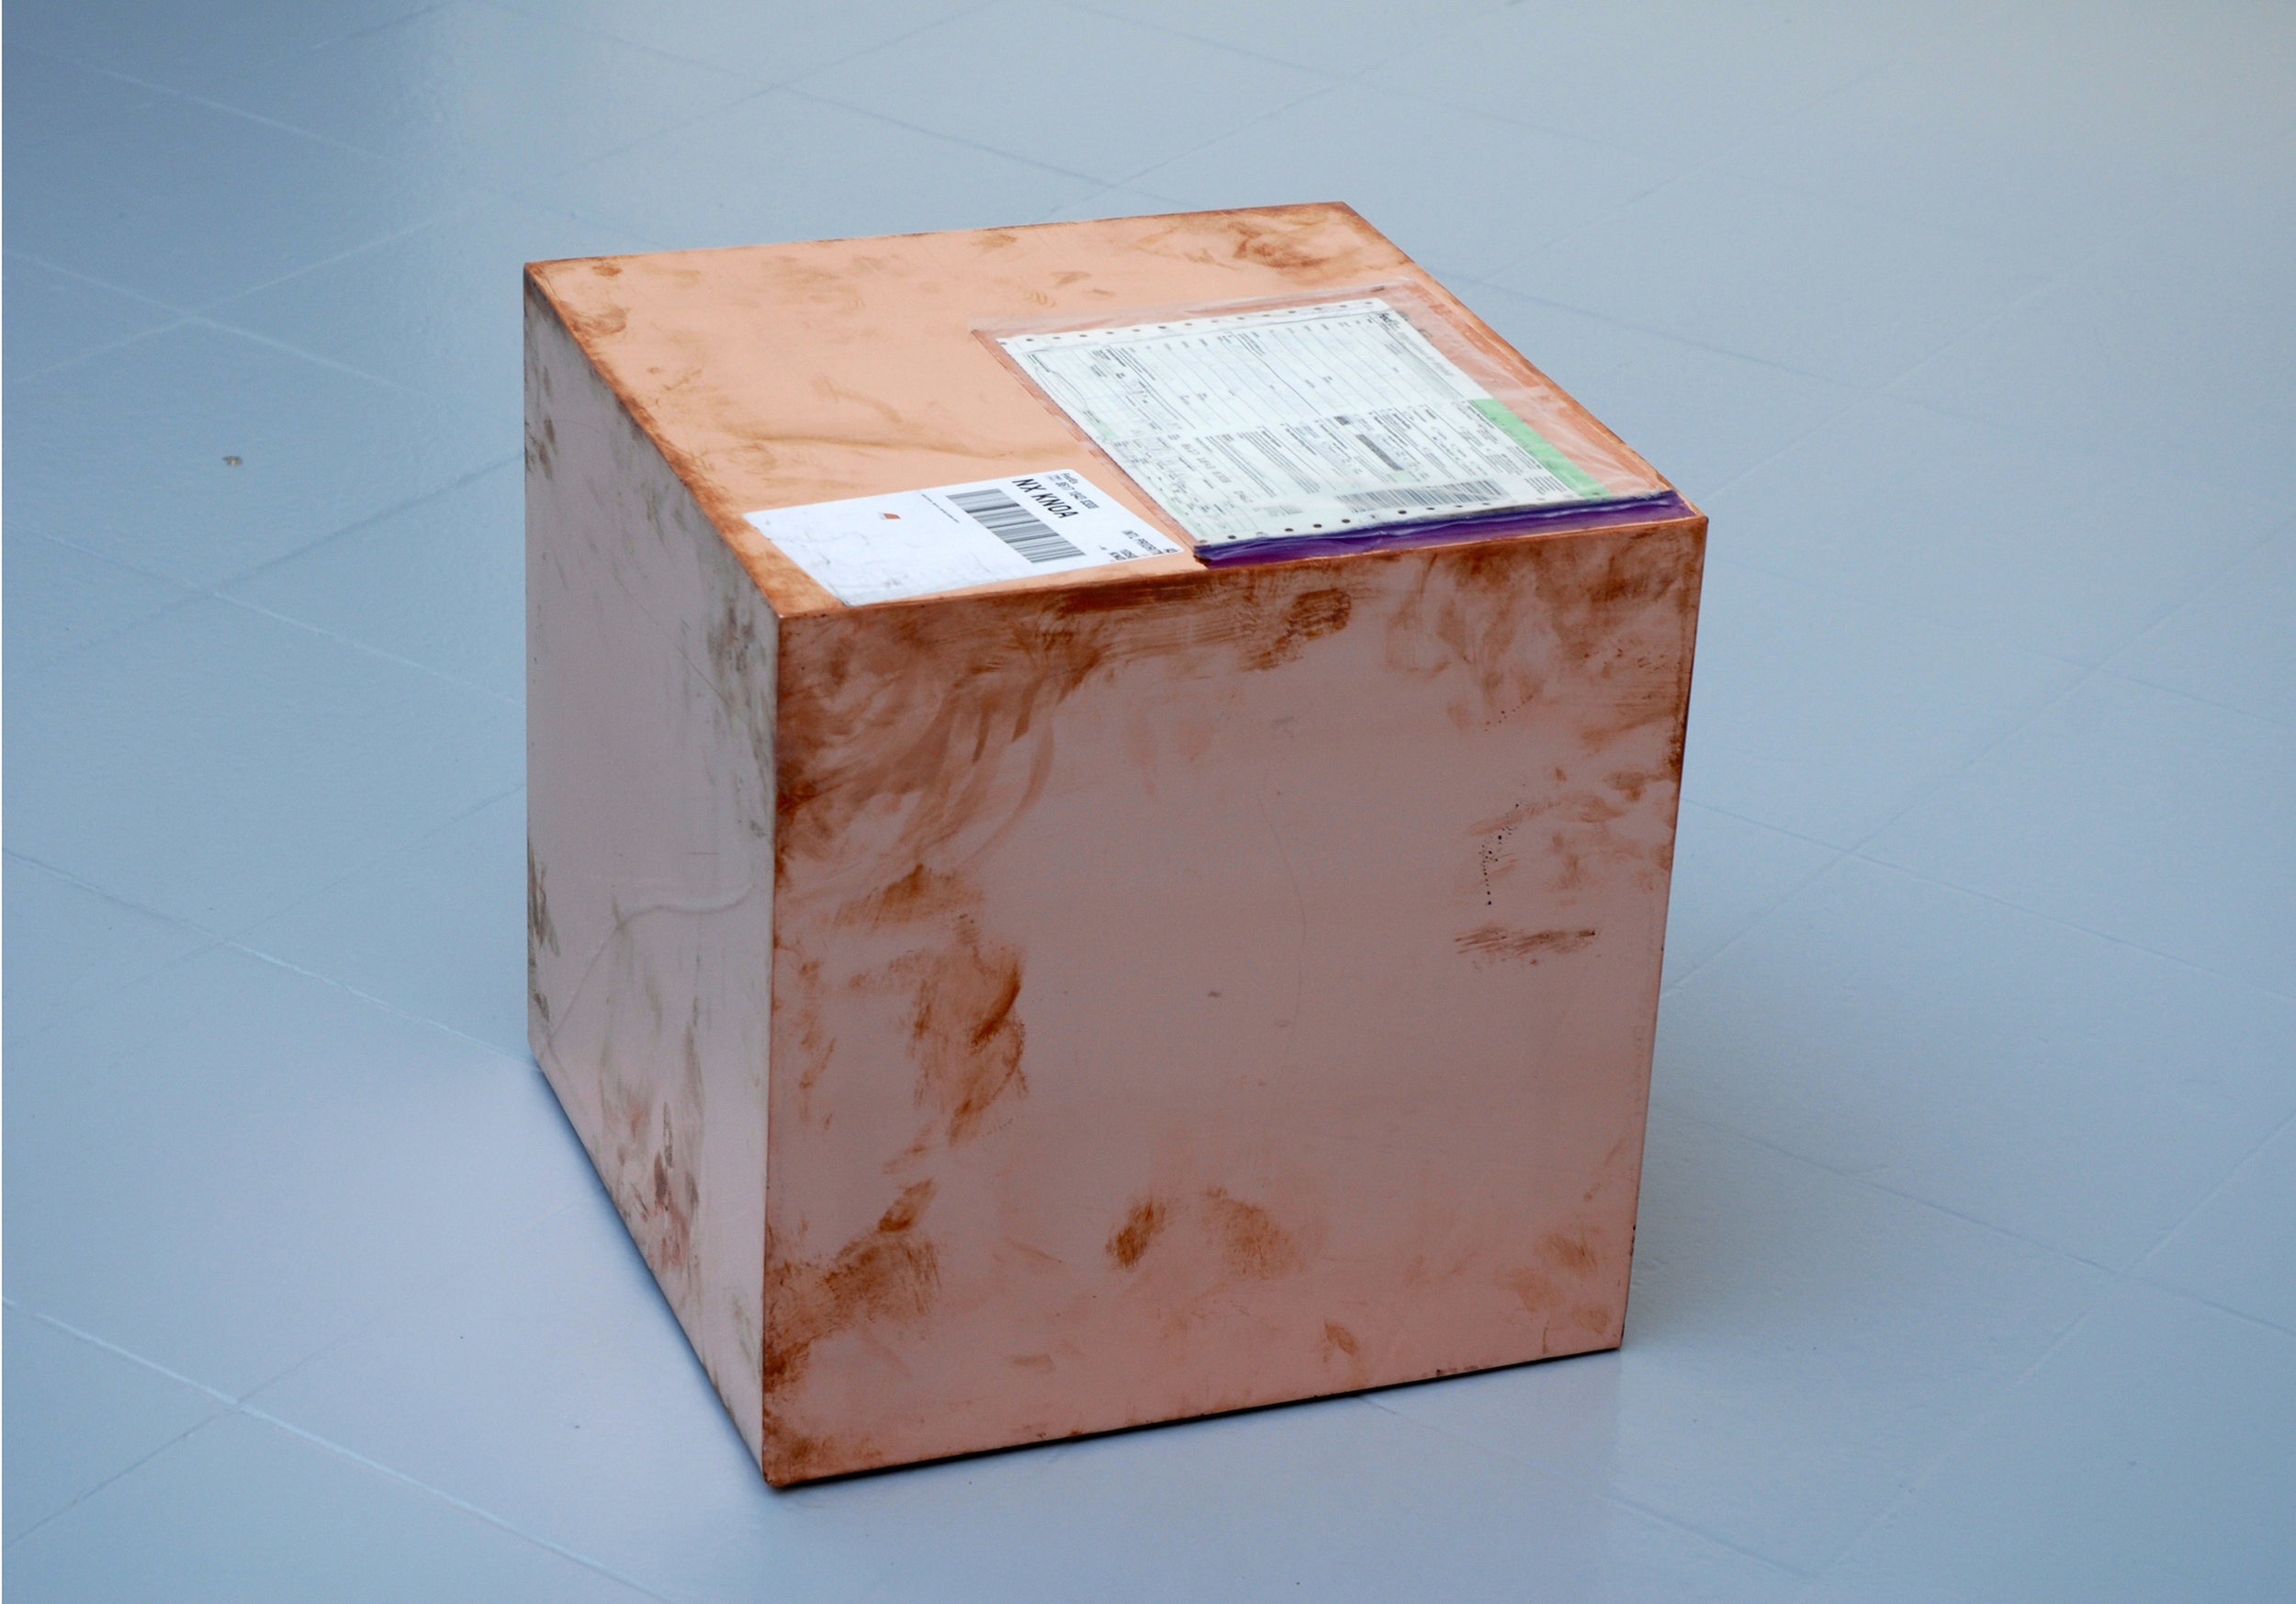   16-inch Copper (FedEx® Kraft Box  © 2005 FEDEX 330504 10/05 SSCC), International Priority, Los Angeles–Brussels trk#861718438308, August 31–September 2, 2011   2011–  Polished copper, accrued FedEx shipping and tracking labels  16 x 16 x 16 inches 